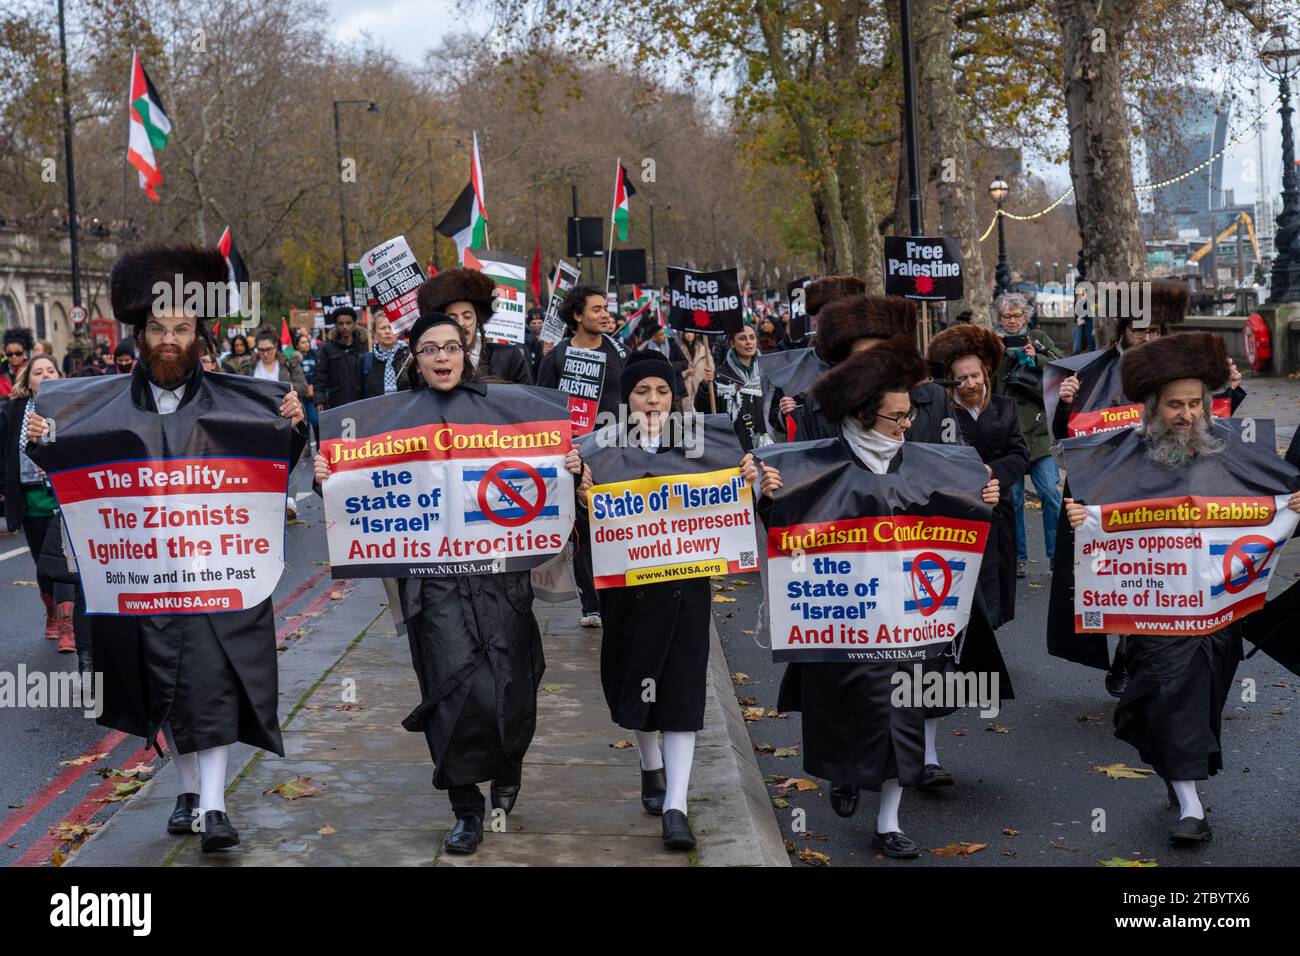 London, UK. Saturday, 9 December, 2023. A group of Hasidic Jewish protestors at a Palestine demonstration against the war in Gaza. Photo: Richard Gray/Alamy Live News Stock Photo